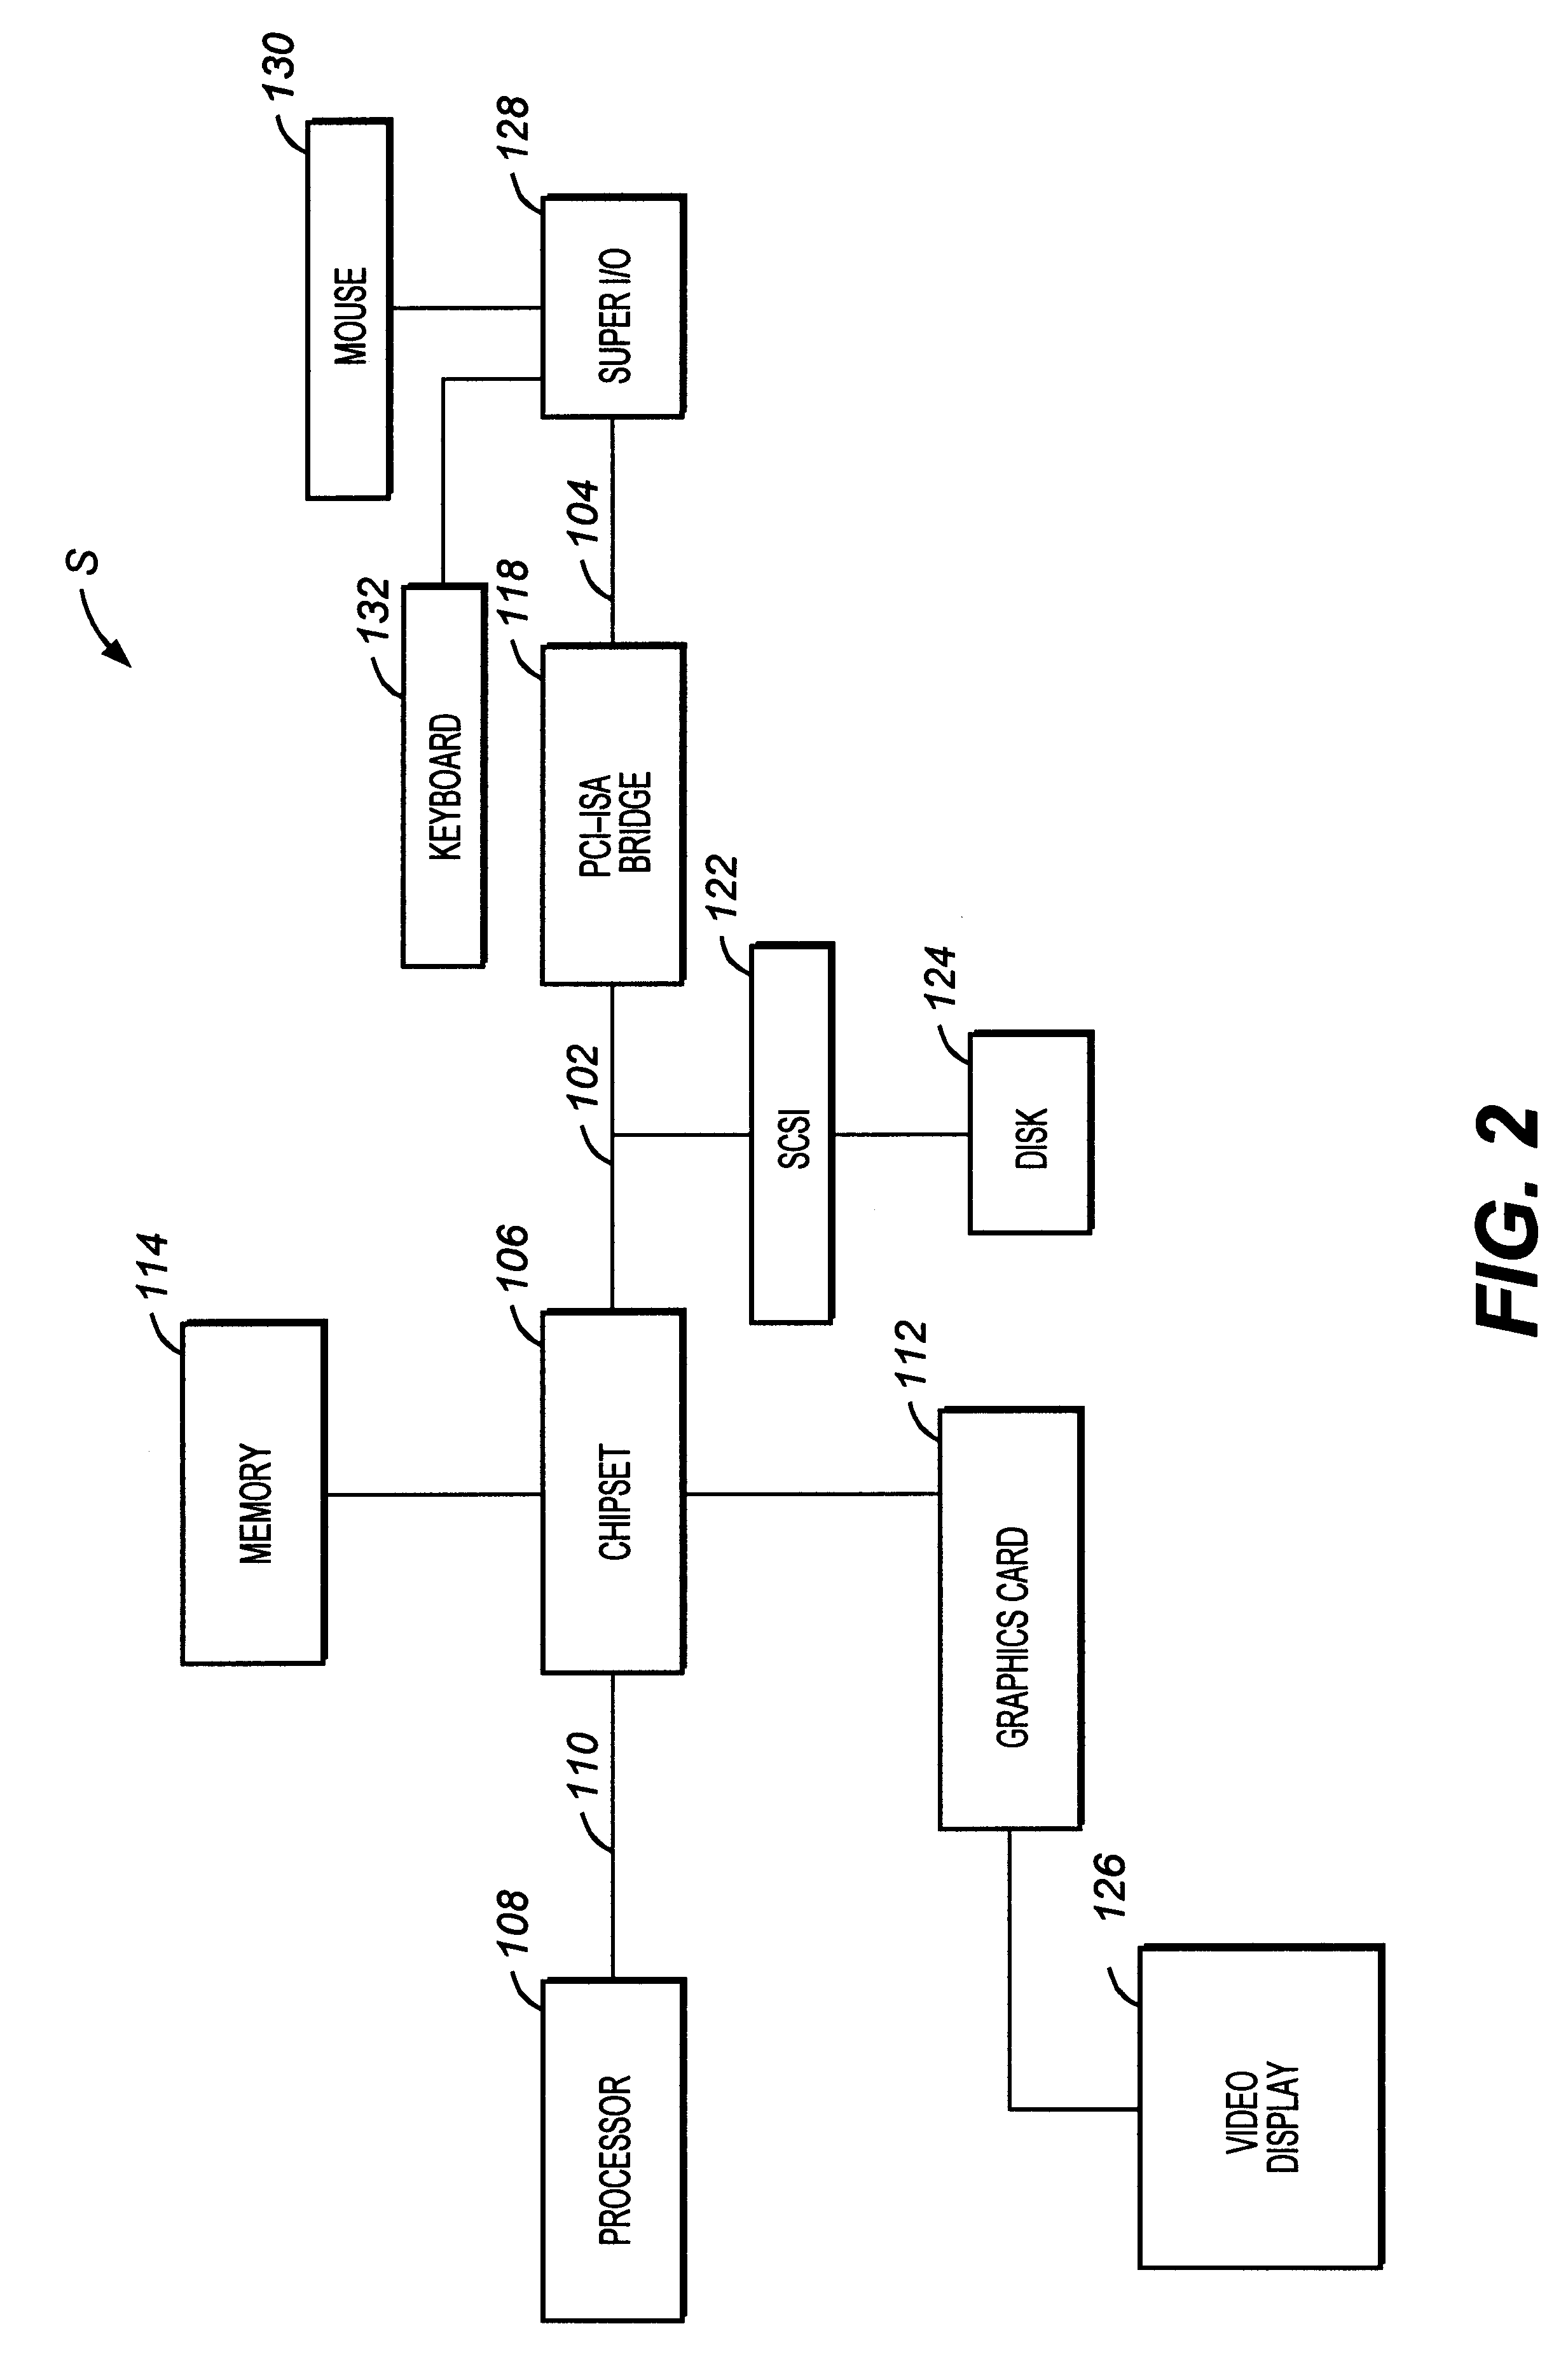 Mapping system for the integration and graphical display of pipeline information that enables automated pipeline surveillance